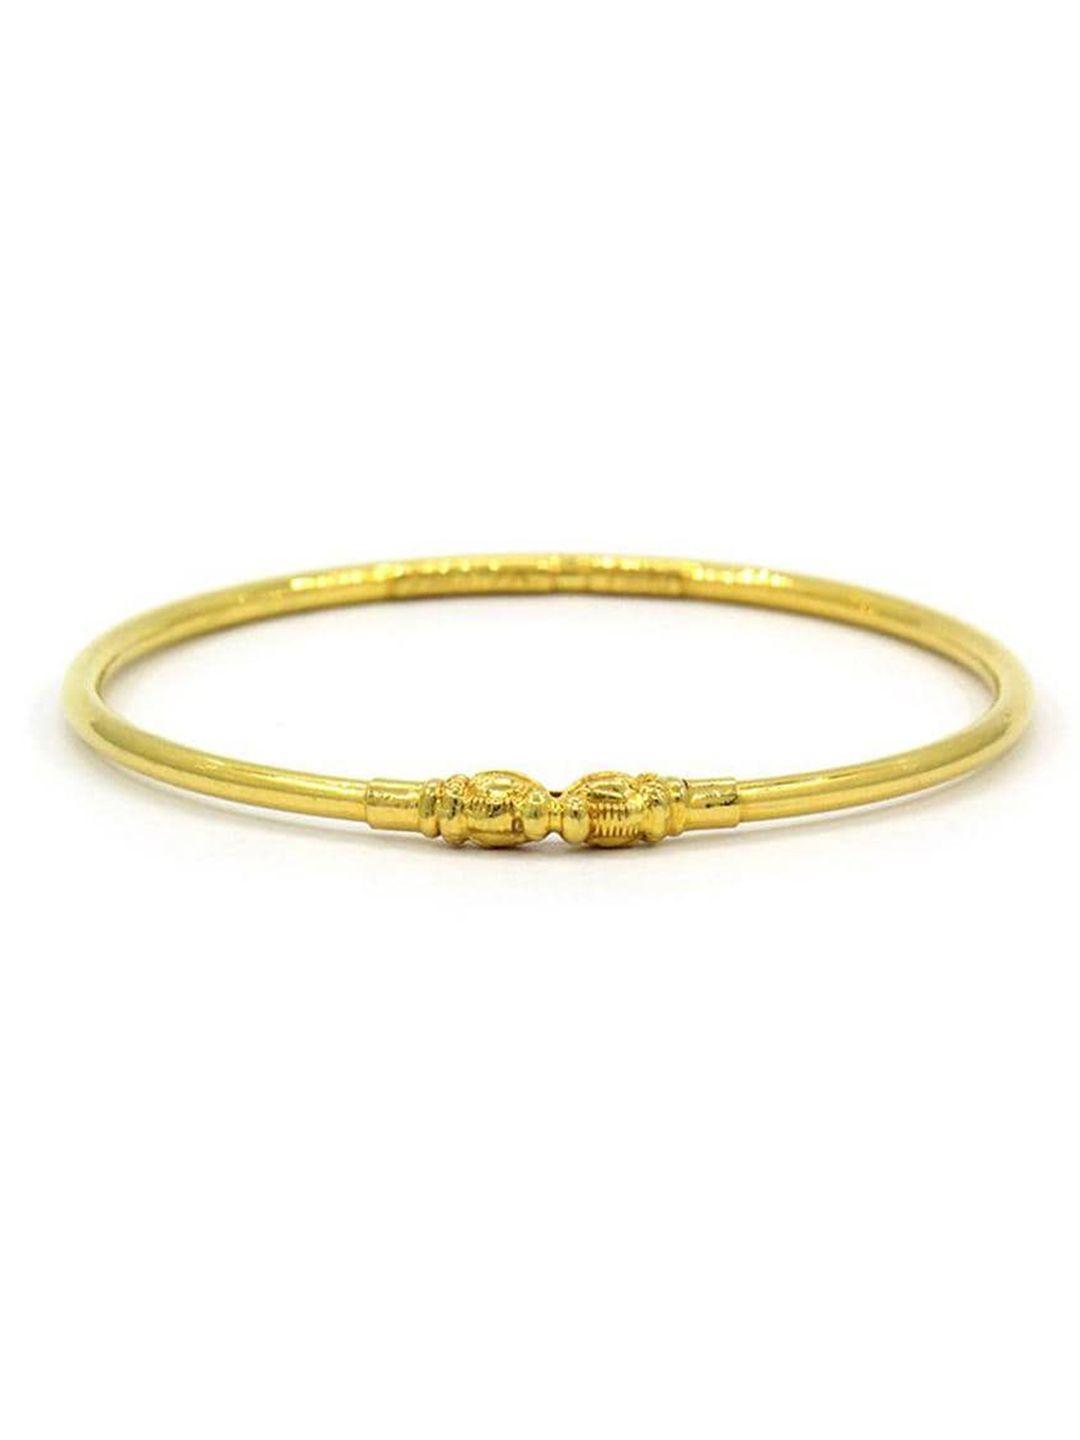 candere a kalyan jewellers company 22kt yellow gold copper and gold bangle